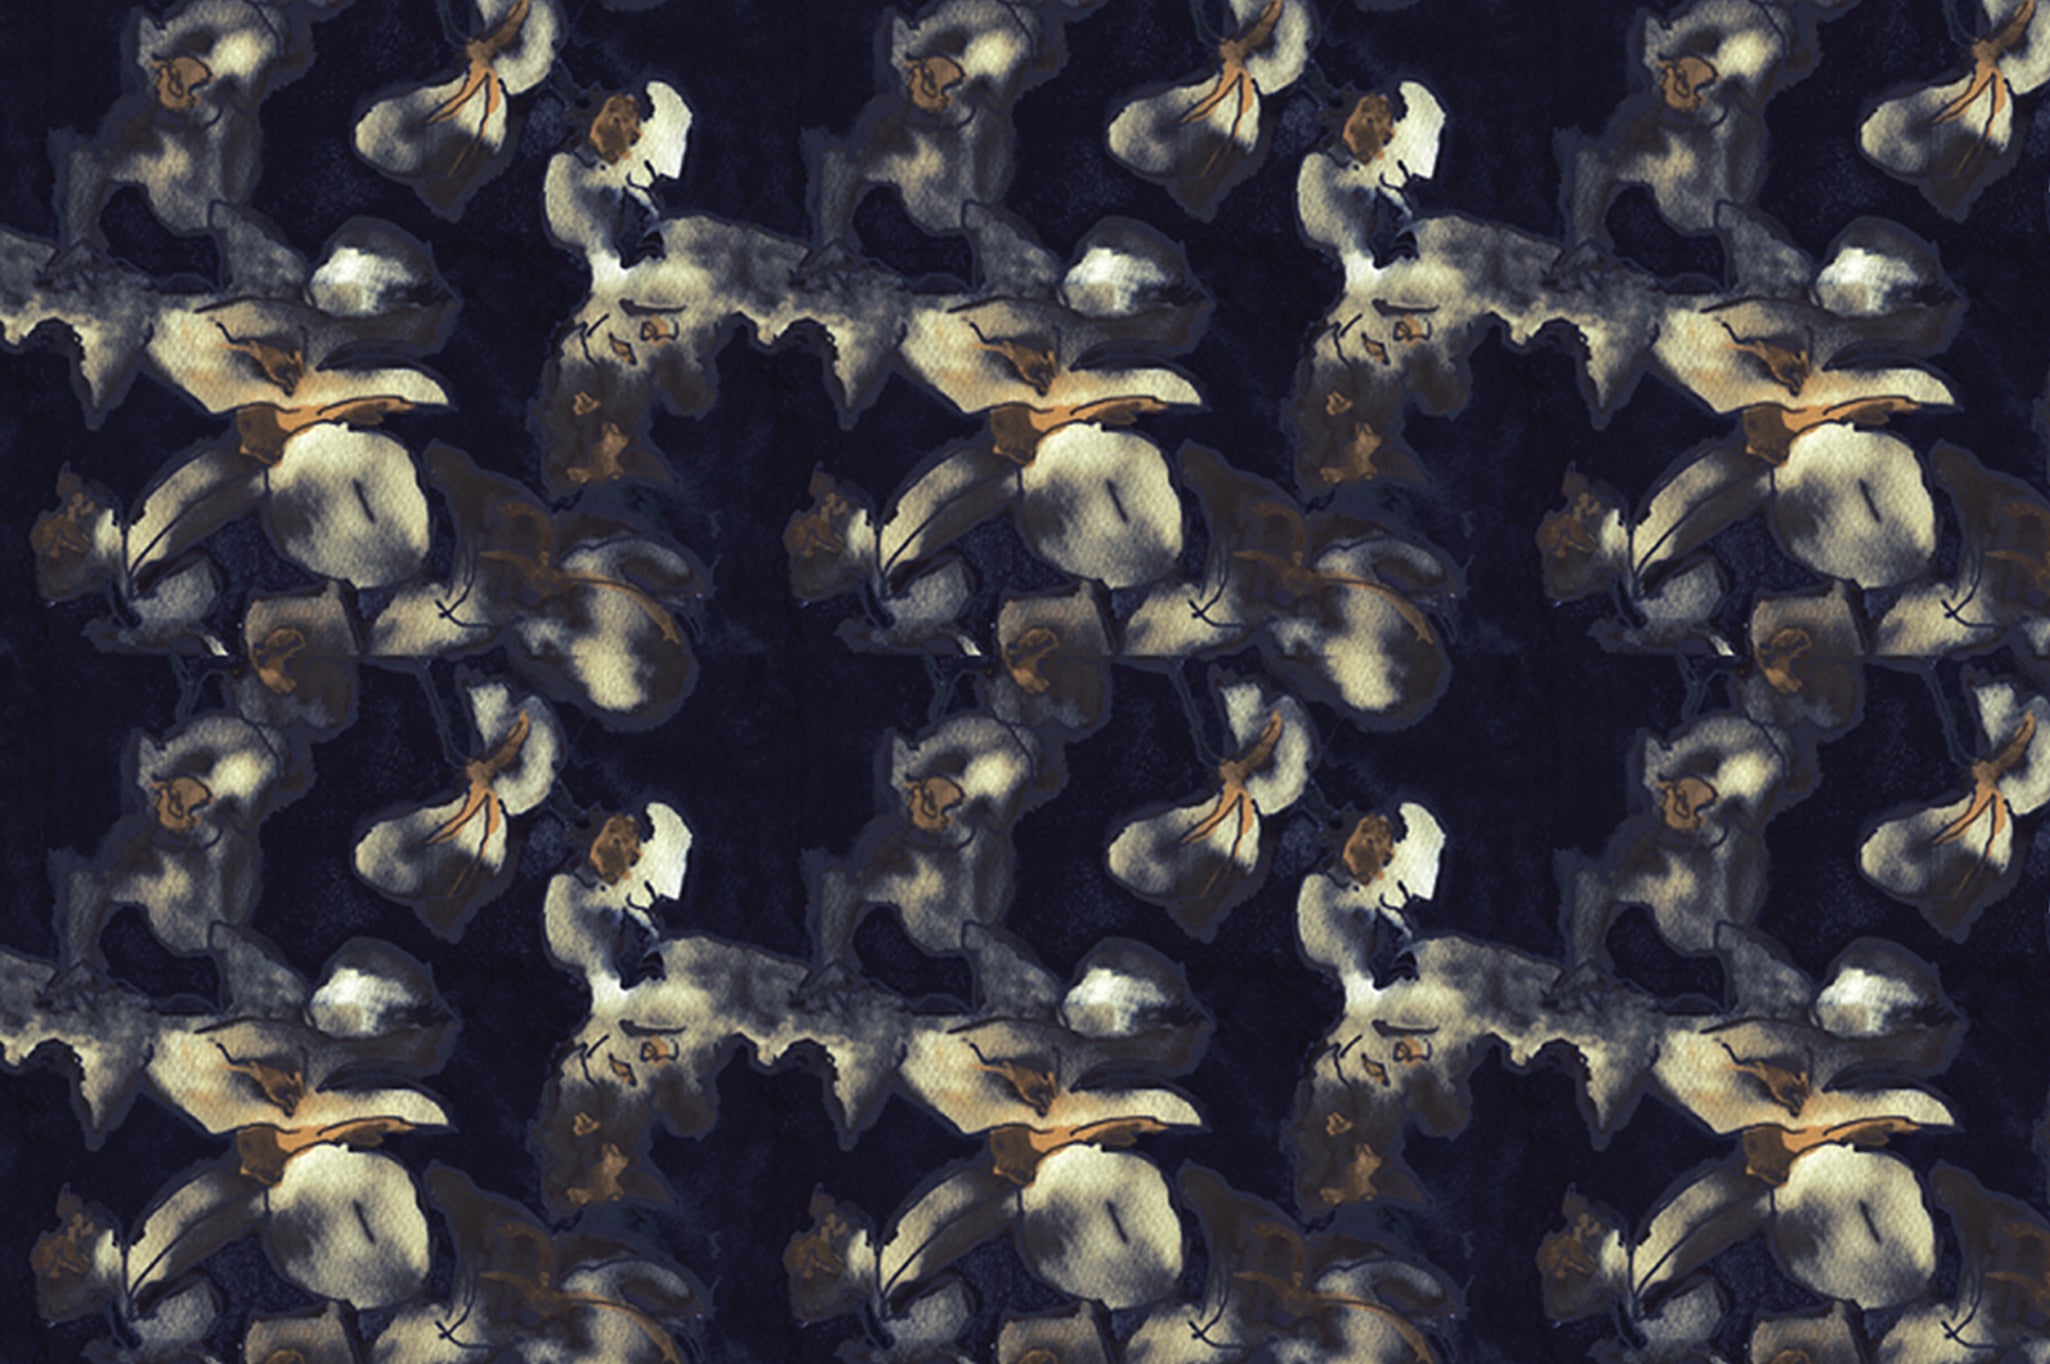 Detail of fabric in an abstract floral print in tan, gold and navy on a black field.